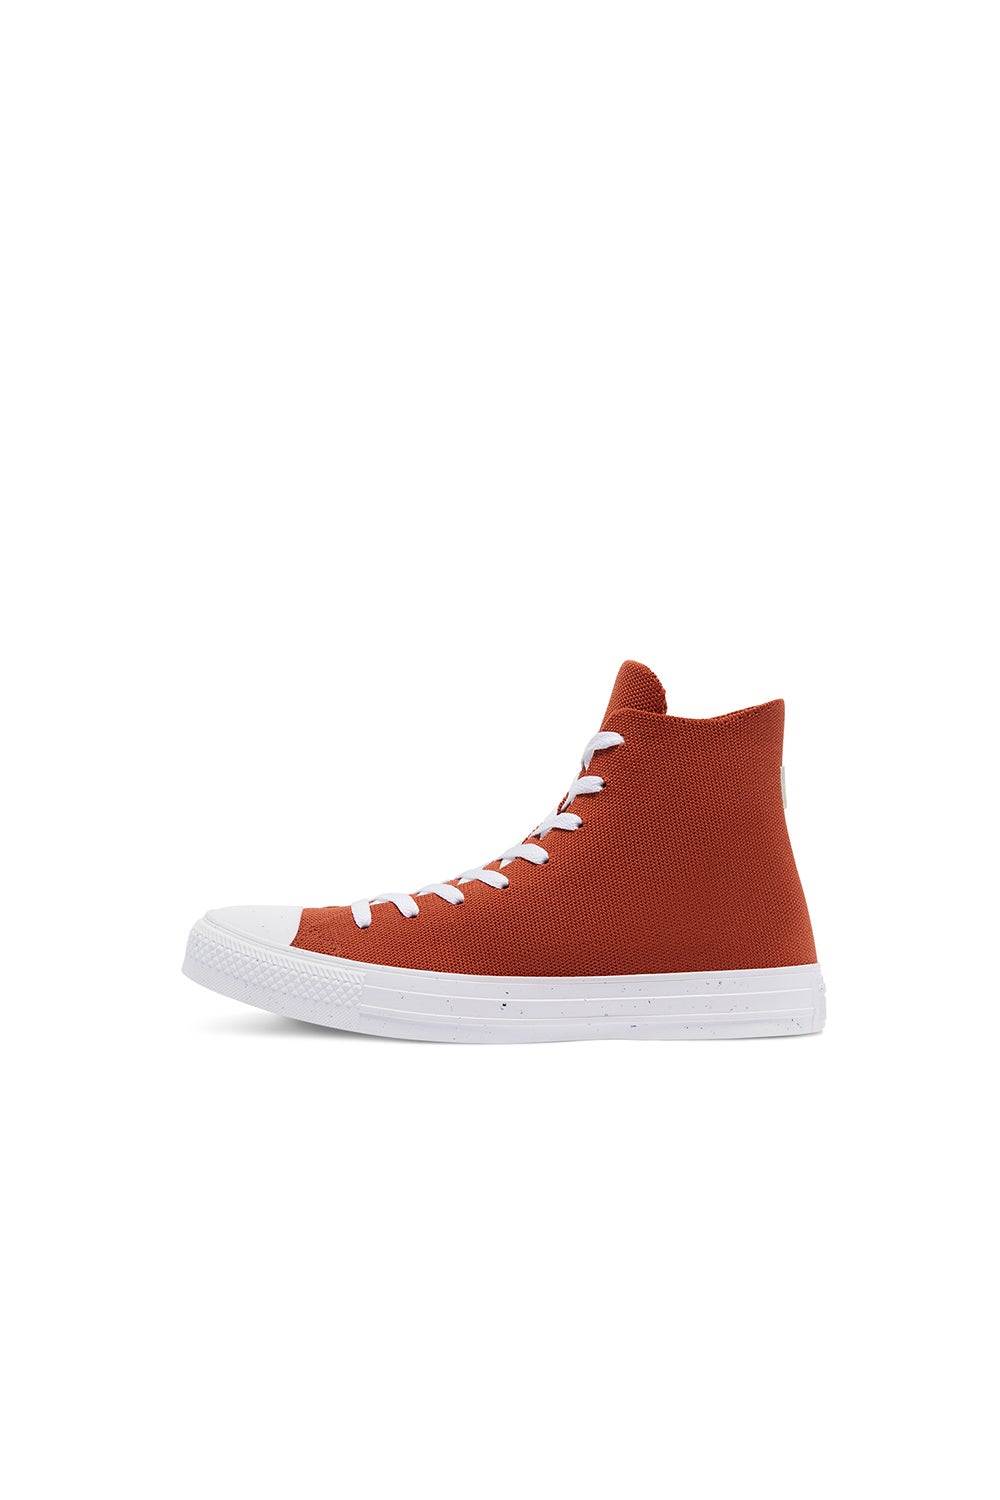 converse flyknit high top red